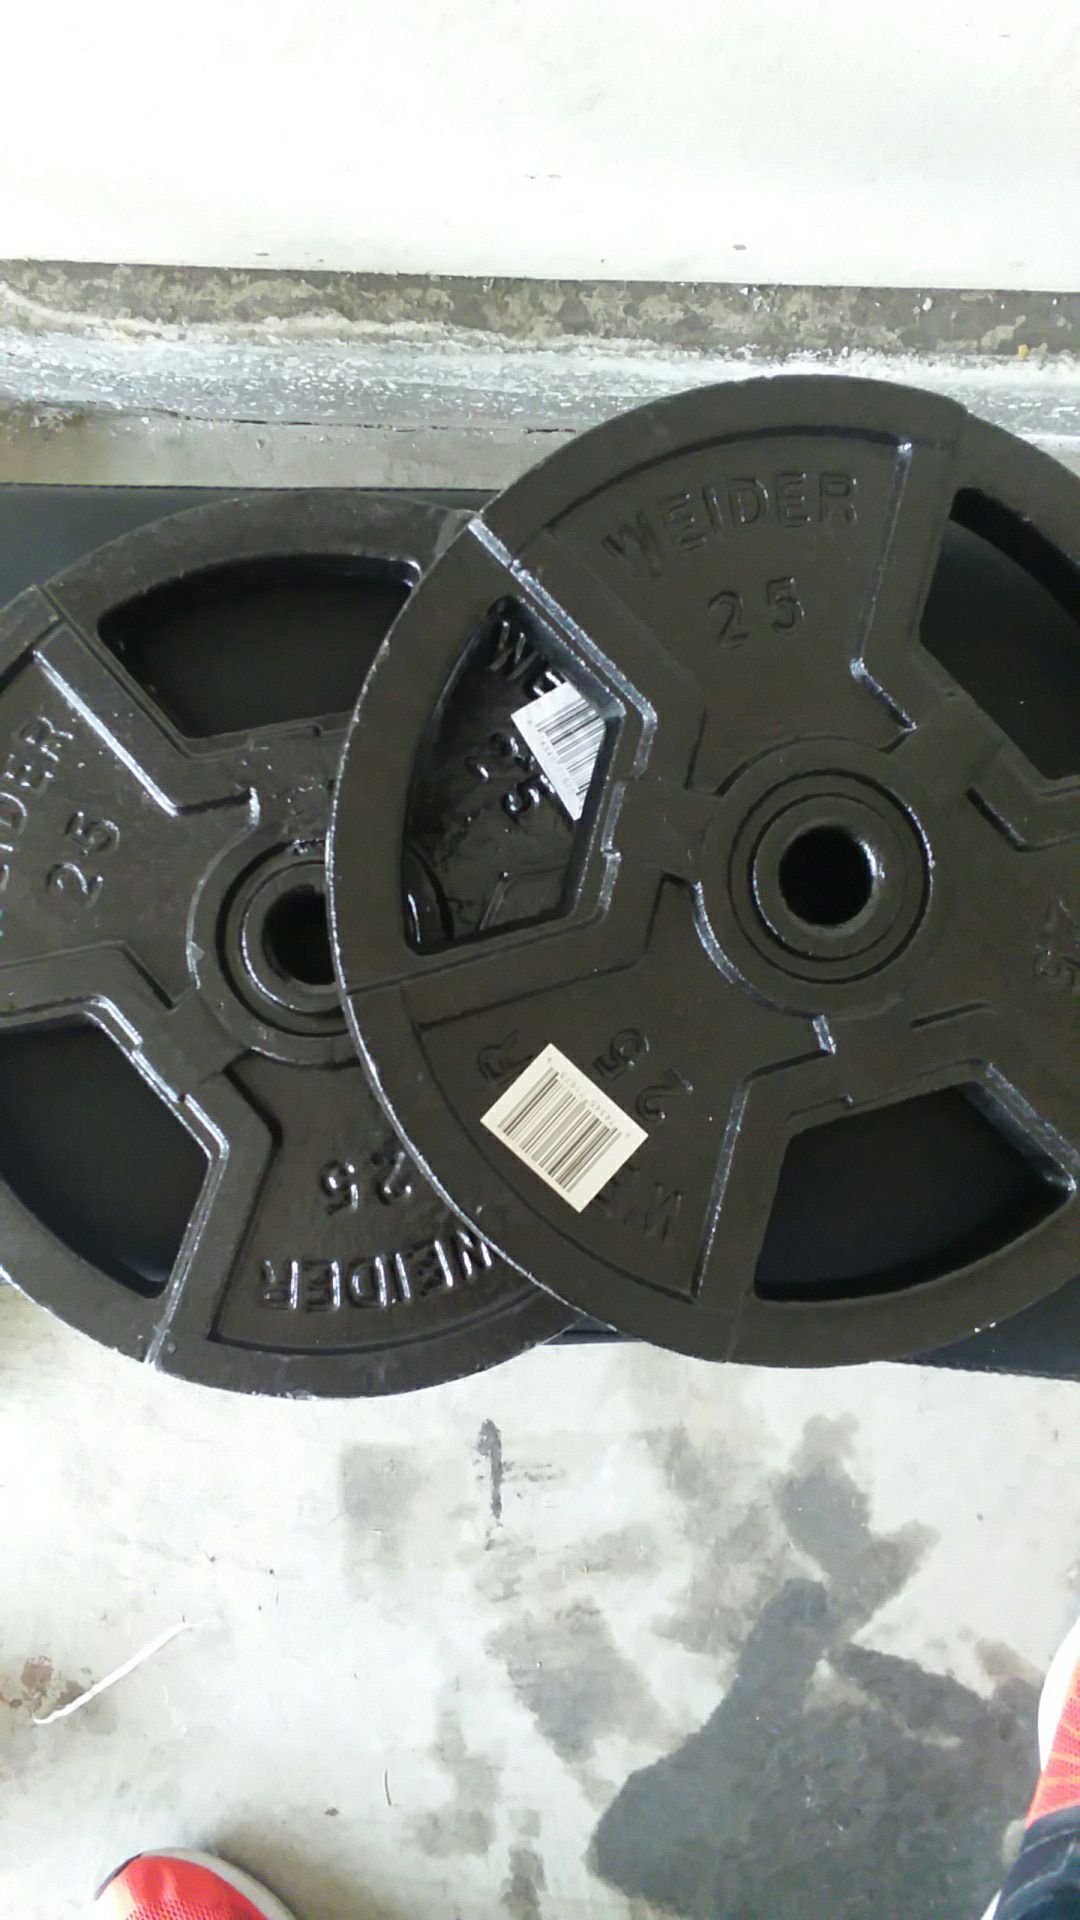 25 lb plates. 1 in holes. Very dense